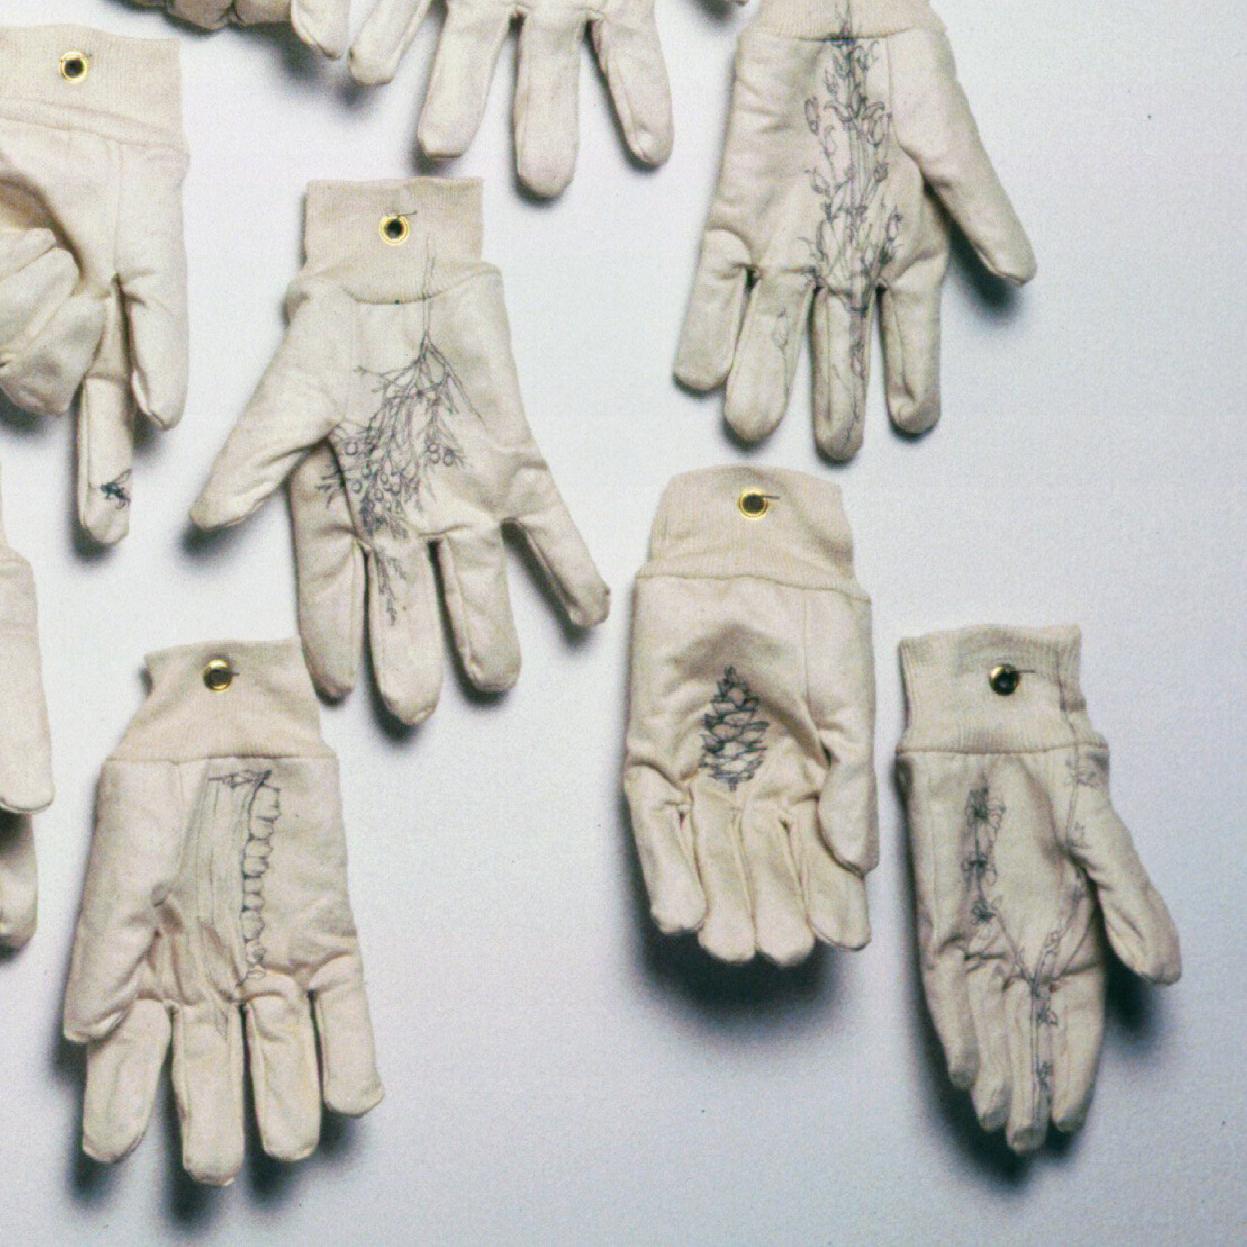 medium: found gloves, rivets, steel

medium: pencil on work gloves
installation dimensions variable

Paul Villinski has created studio and large-scale artworks for more than three decades. Villinski was born in York, Maine, USA, in 1960, son of